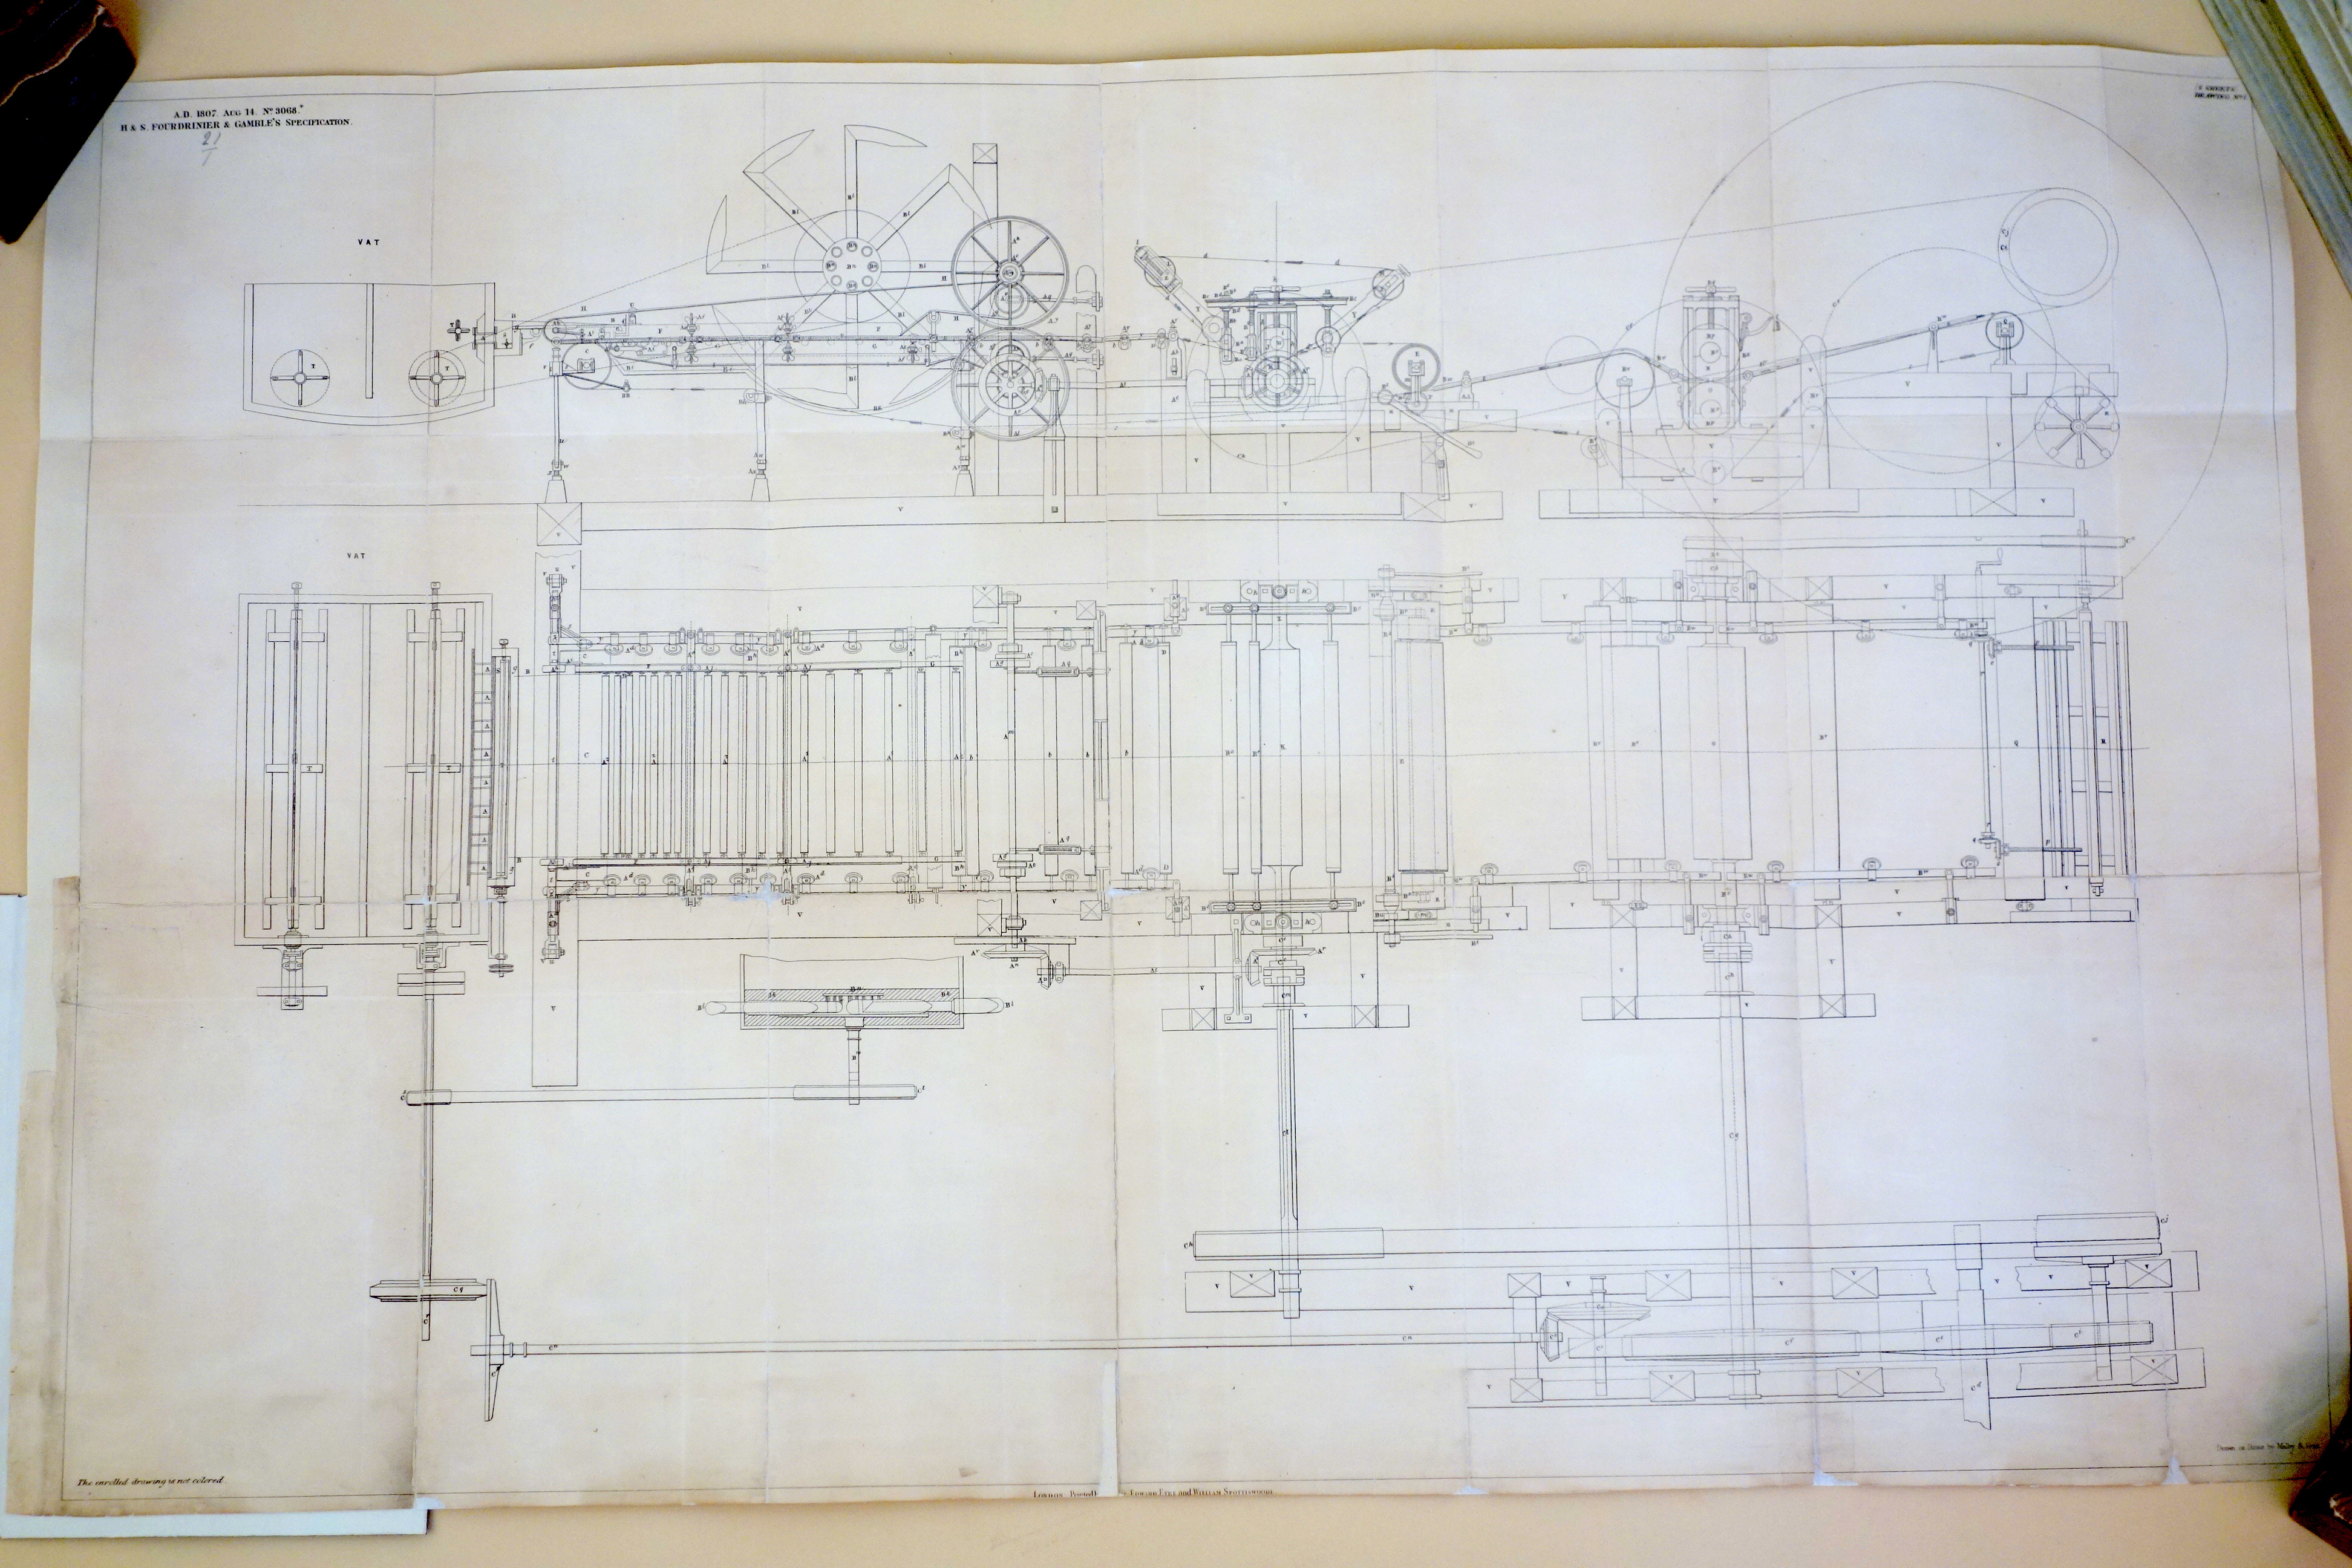  A patent drawing from the Fourdinier & Gamble patent of 1807. This was the first patent on what came to be called the Fourdrinier machine.